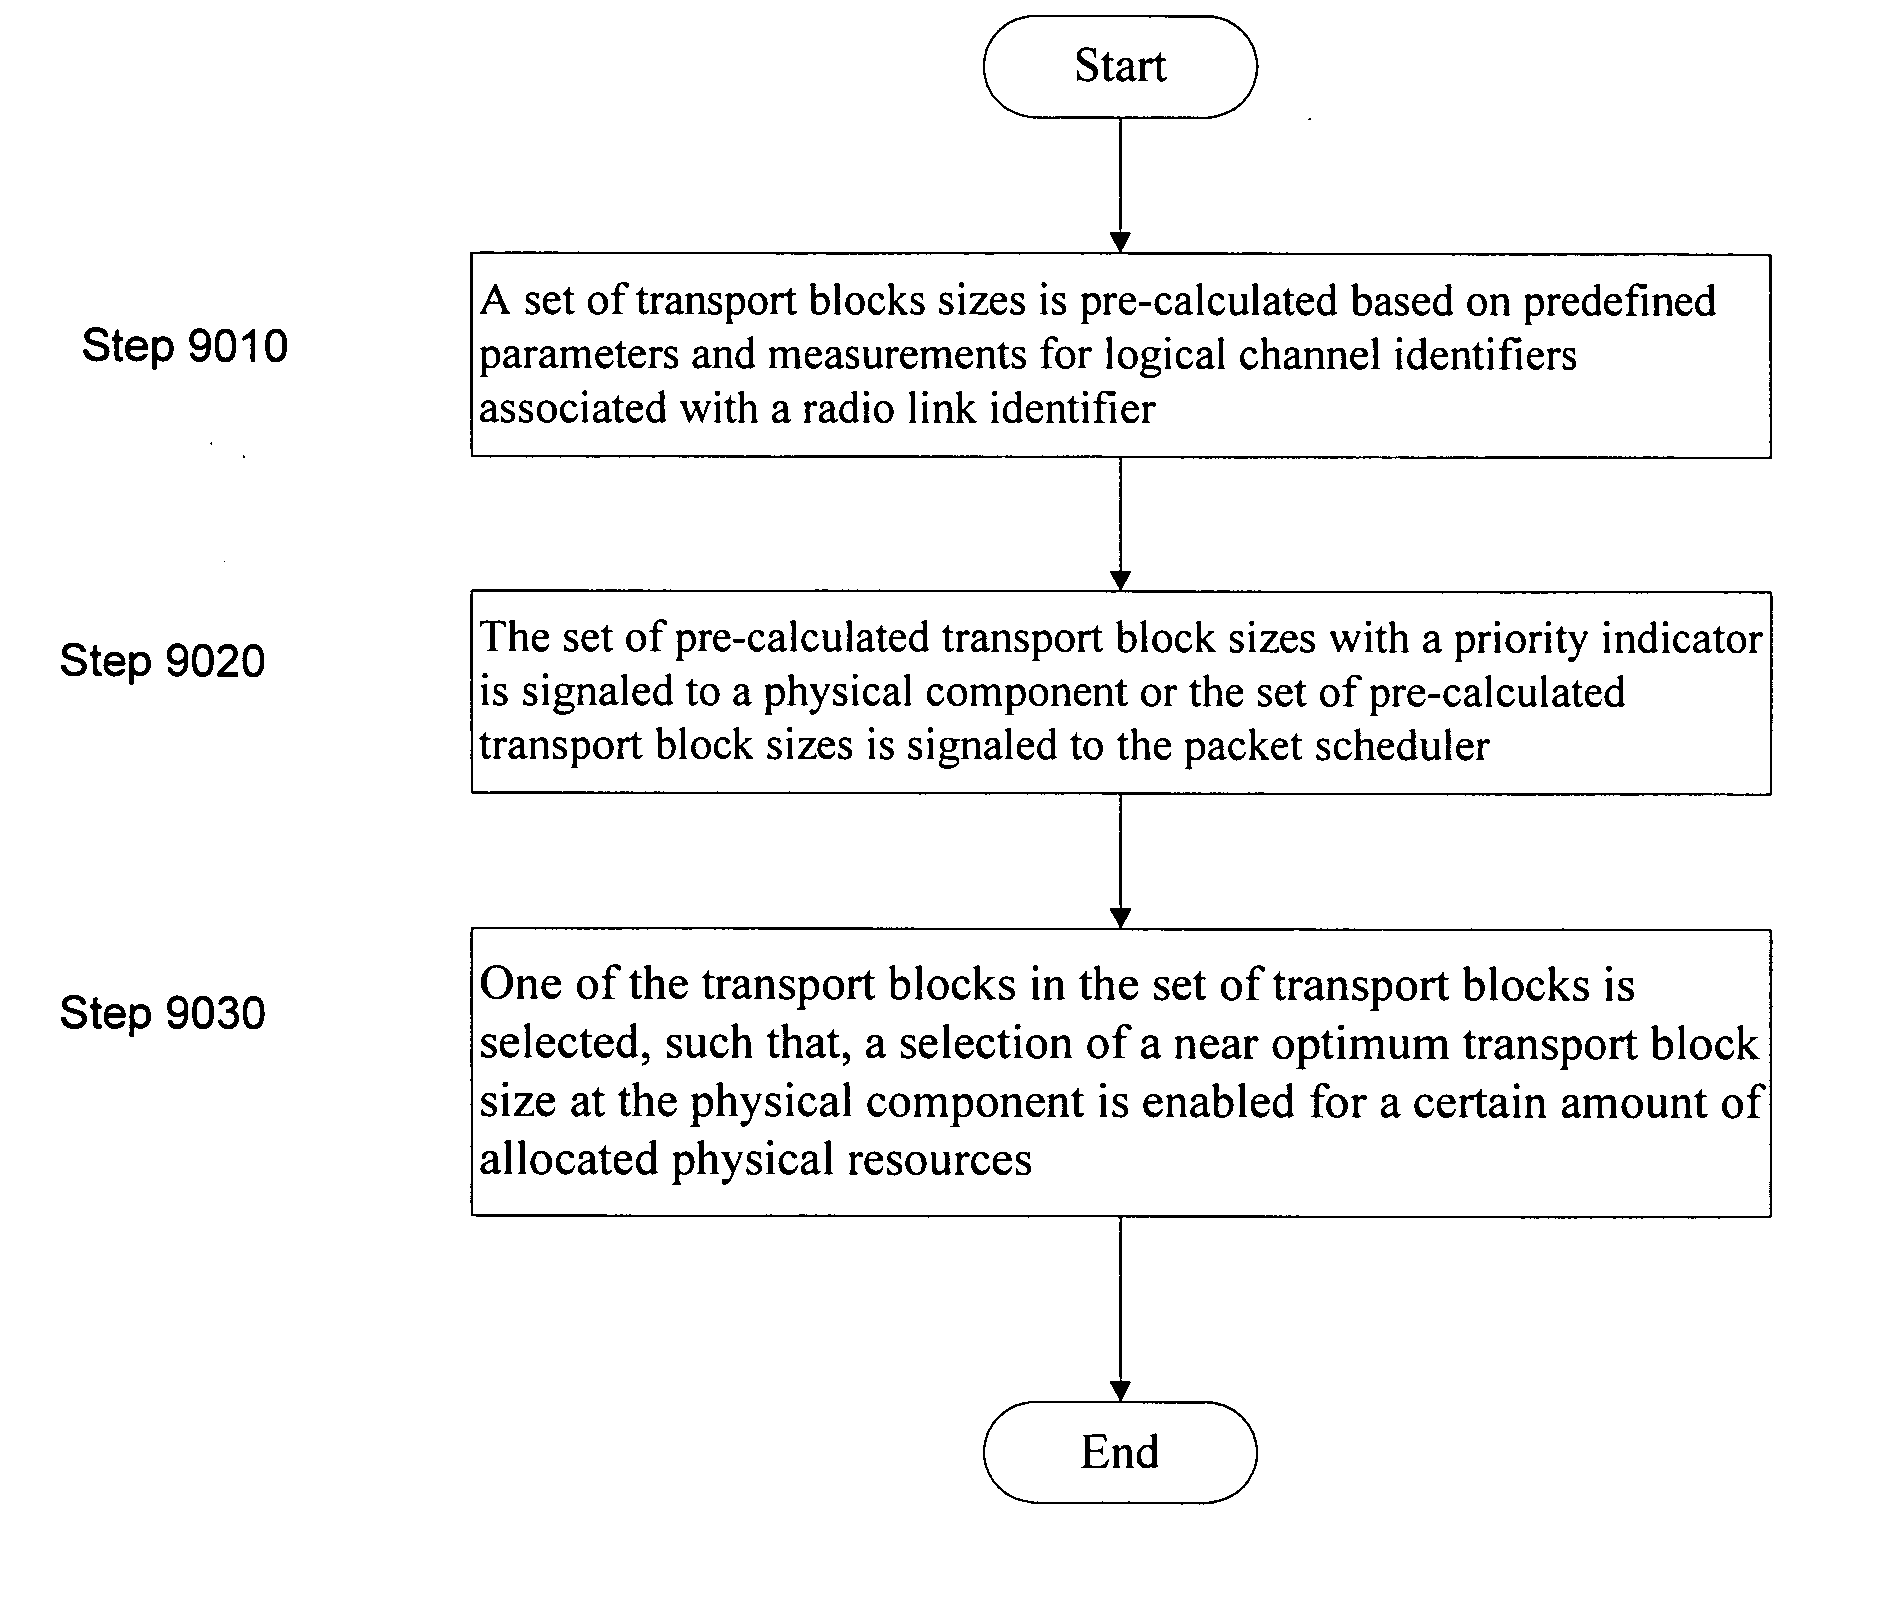 MAC-driven transport block size selection at a physical layer